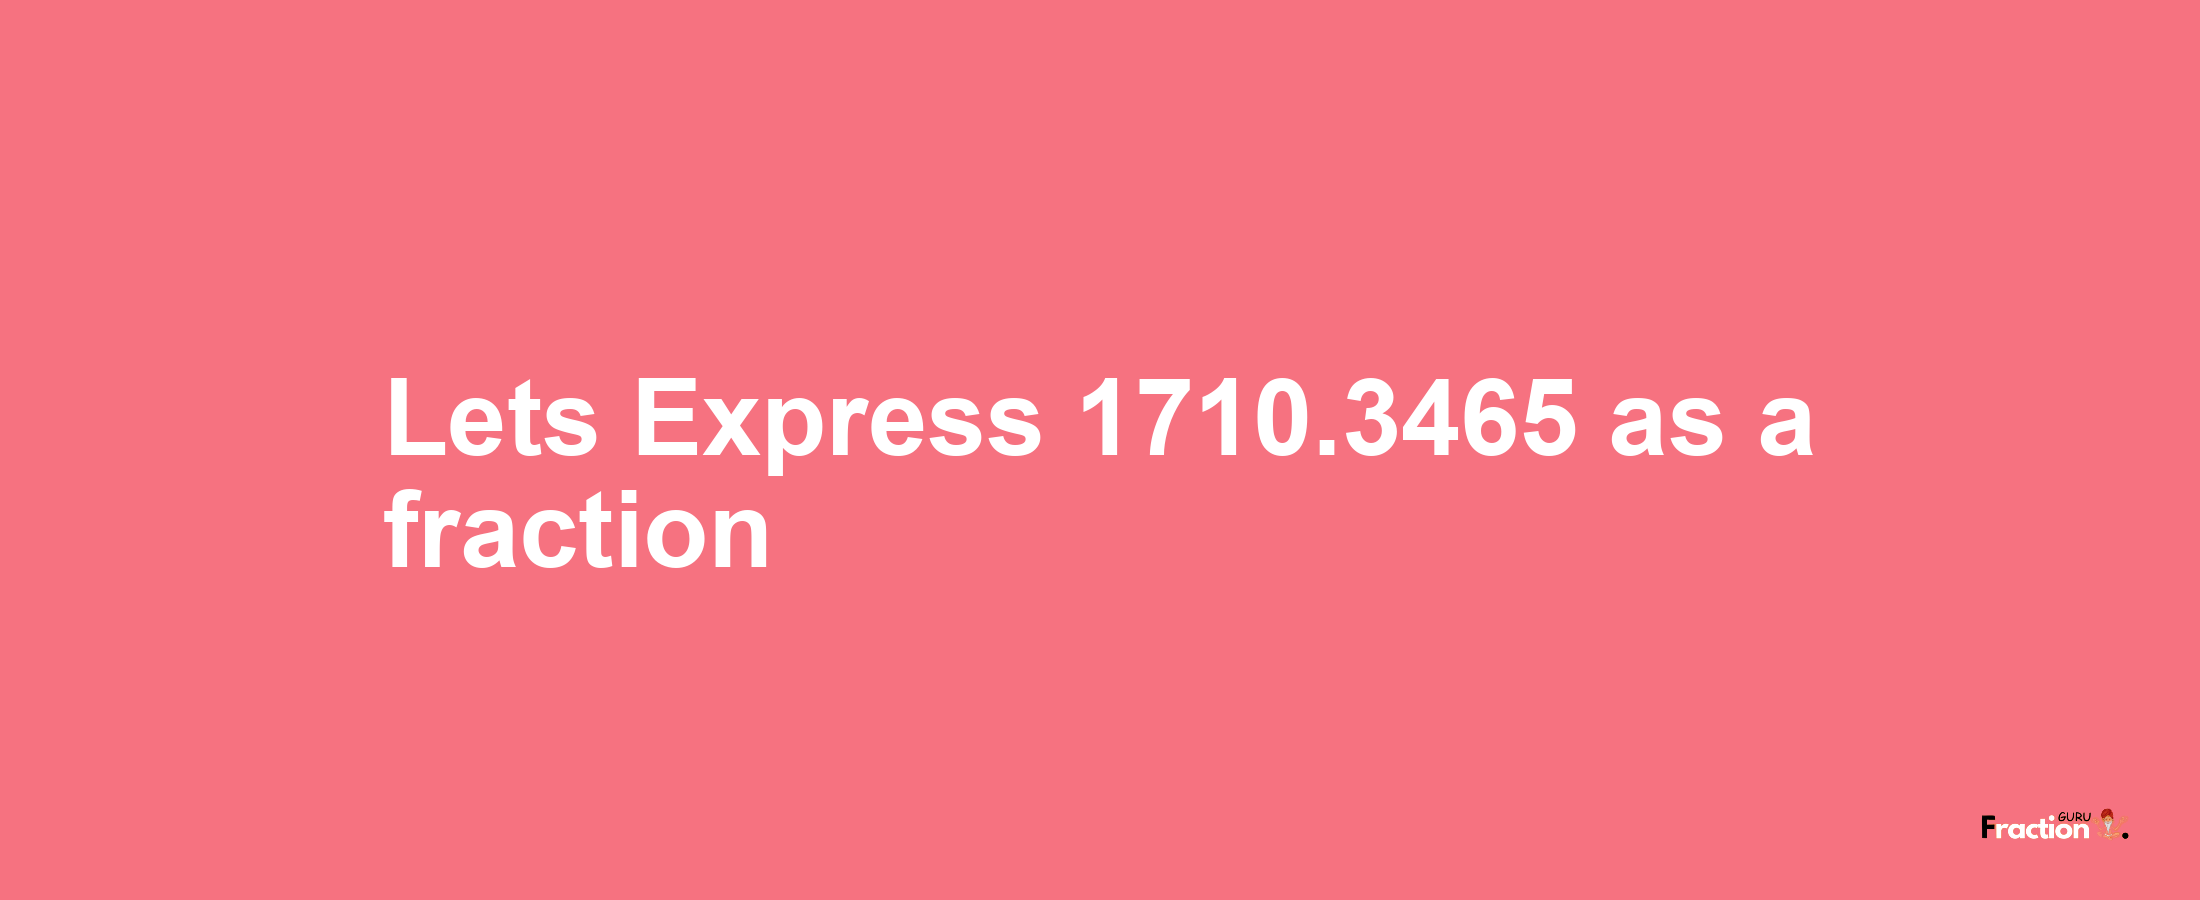 Lets Express 1710.3465 as afraction